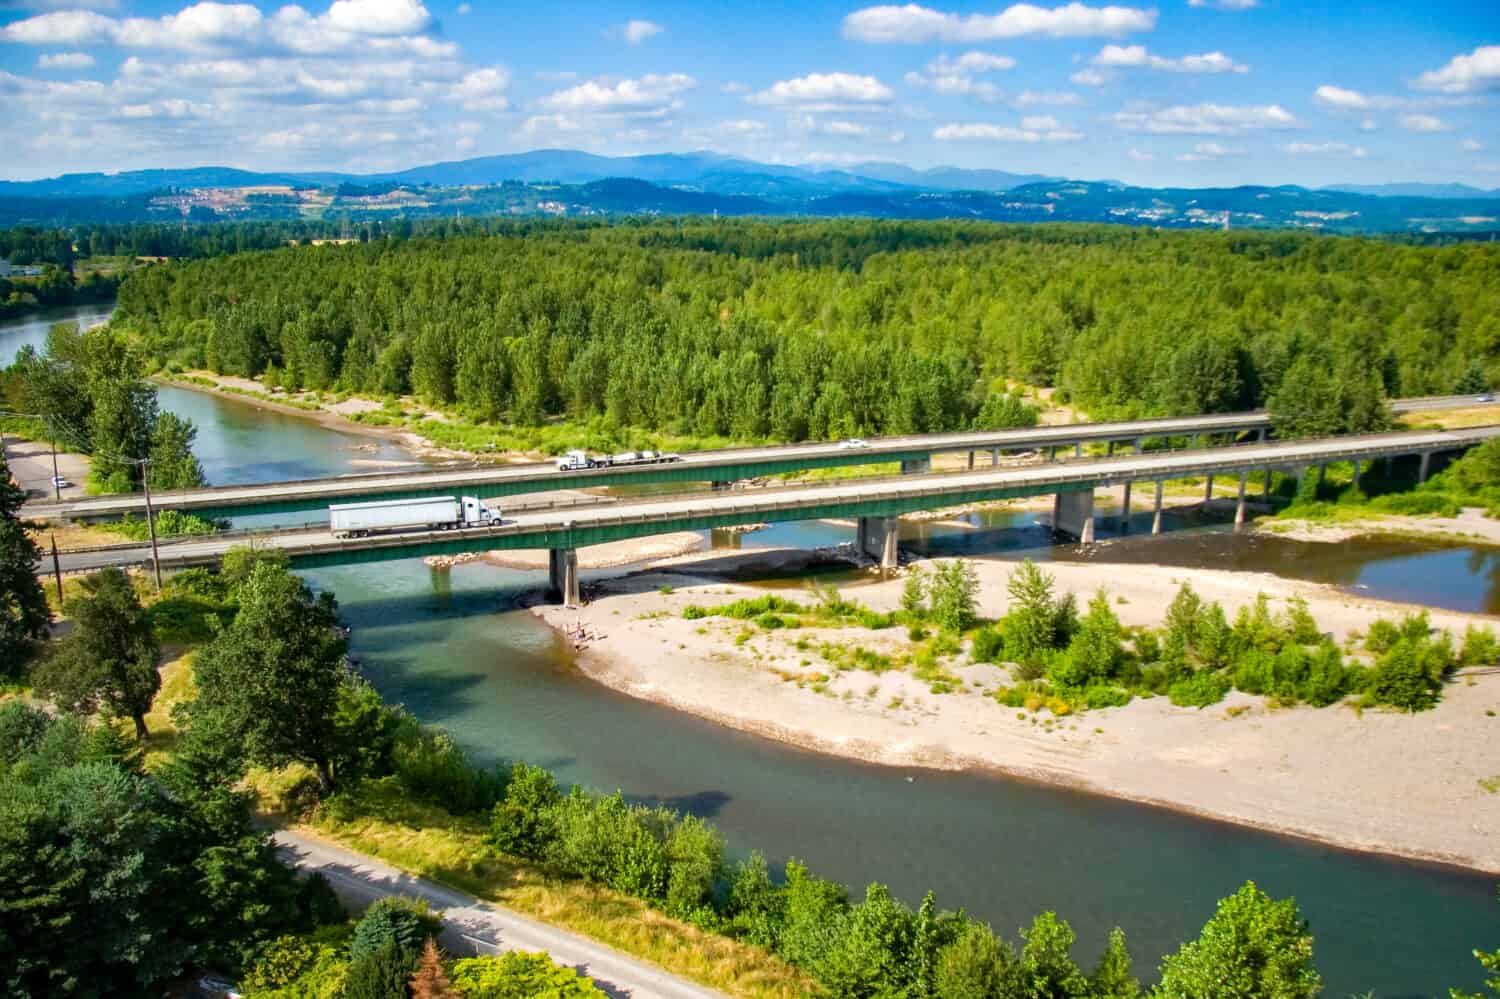 Aerial photo of the Highway I-84 bridge over the Sandy river just east of Portland, Oregon